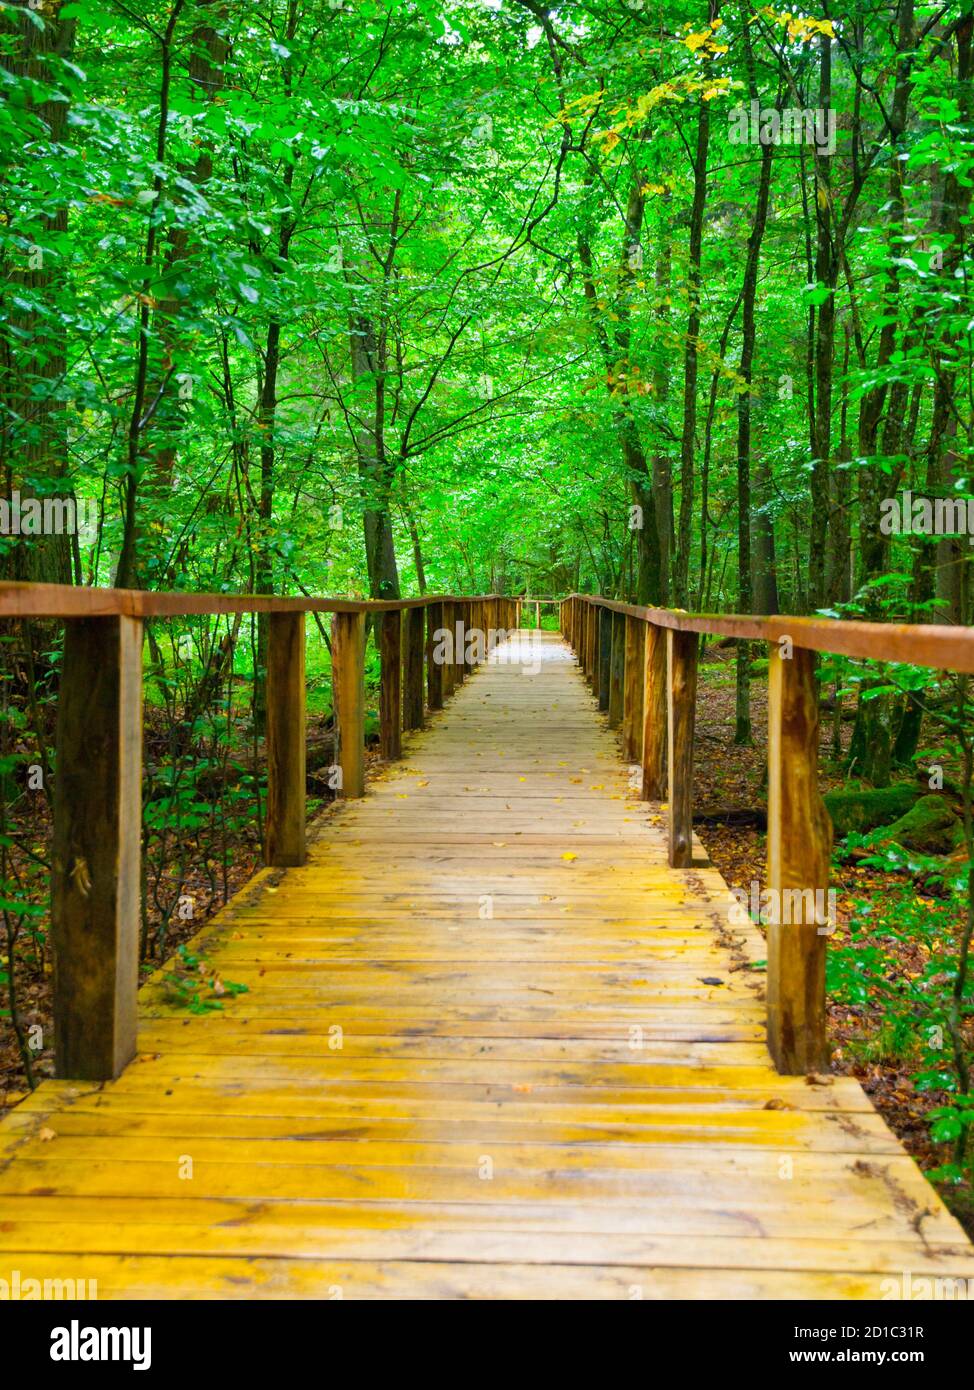 Wooden path in forest after rain, Bialowieza, Poland Stock Photo